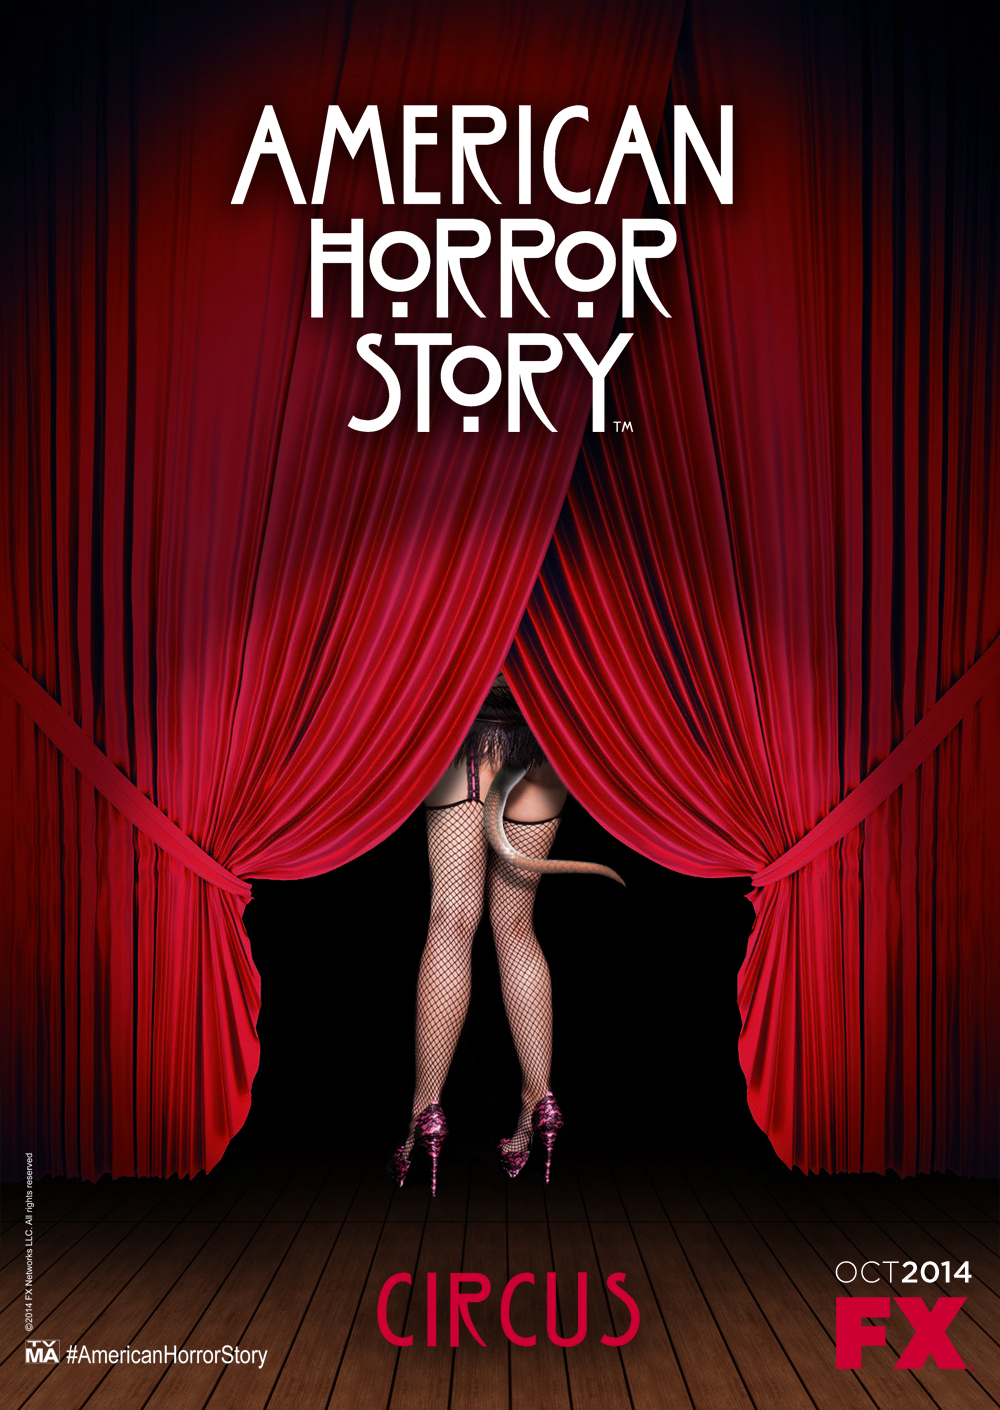 American Horror Story - Circus (teaser poster 2) by Ludingirra on